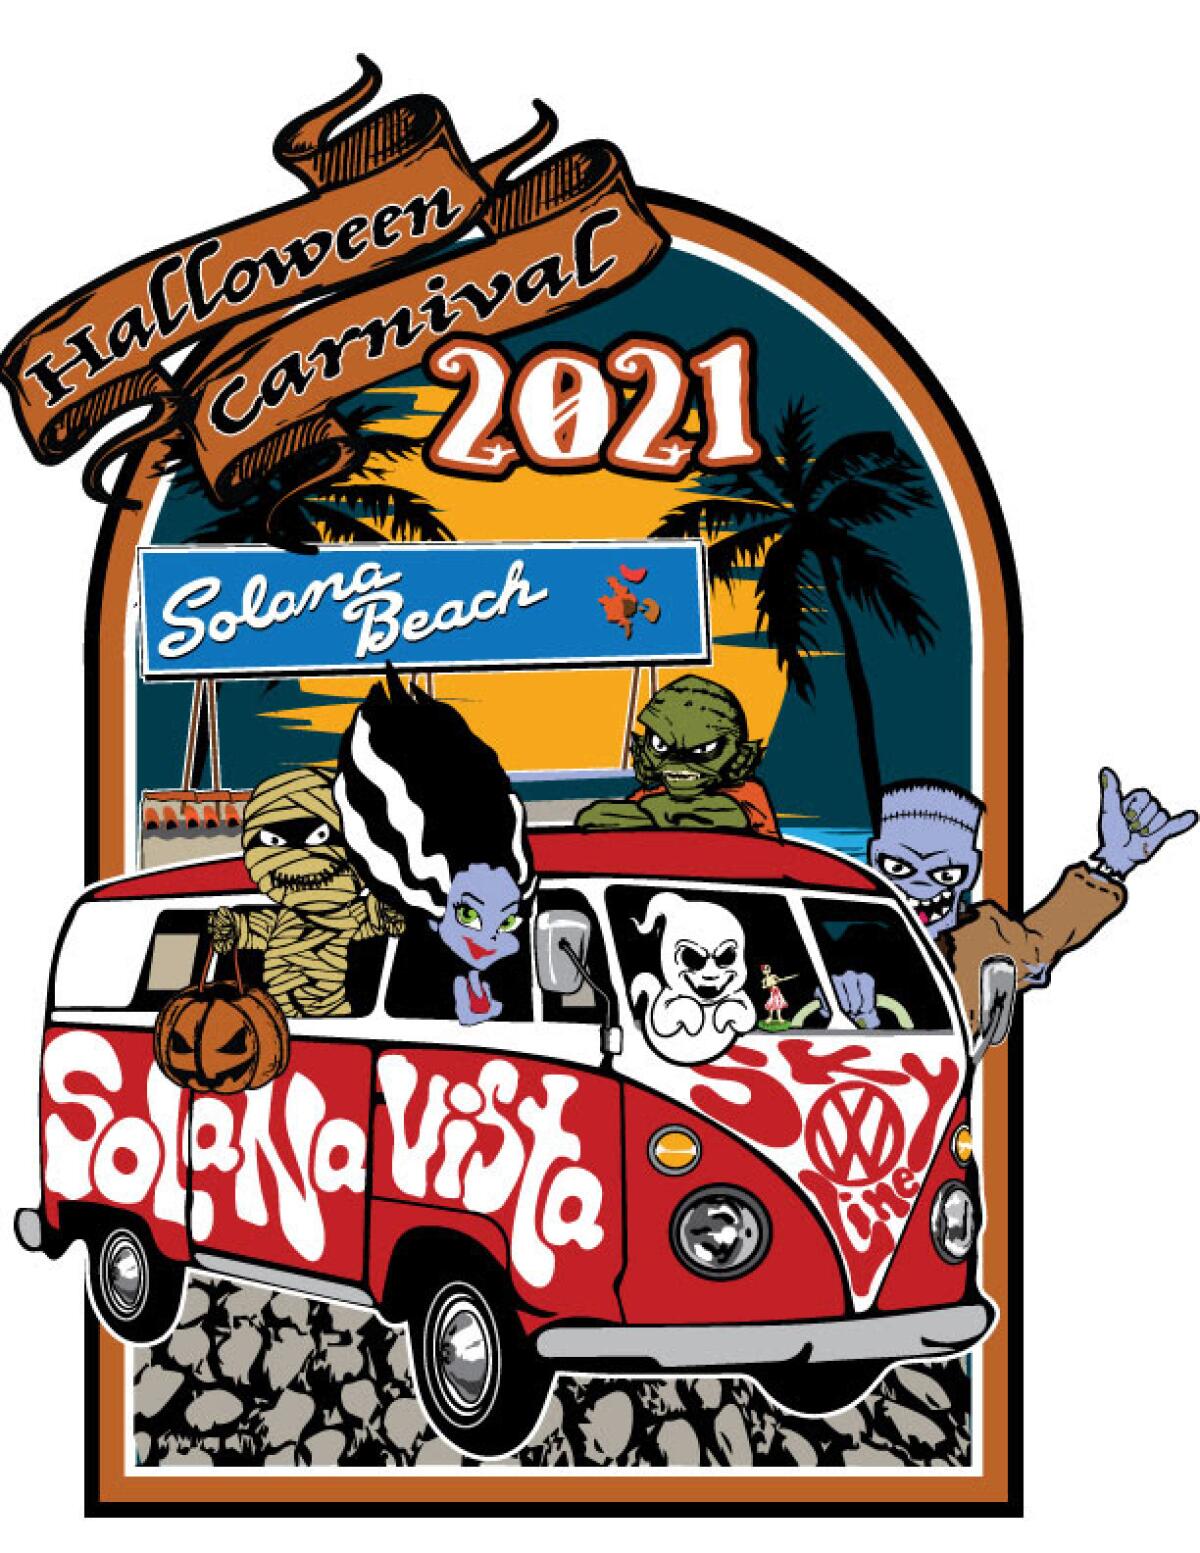 A Halloween Carnival logo designed by SBSD parent Jesus Peraza.